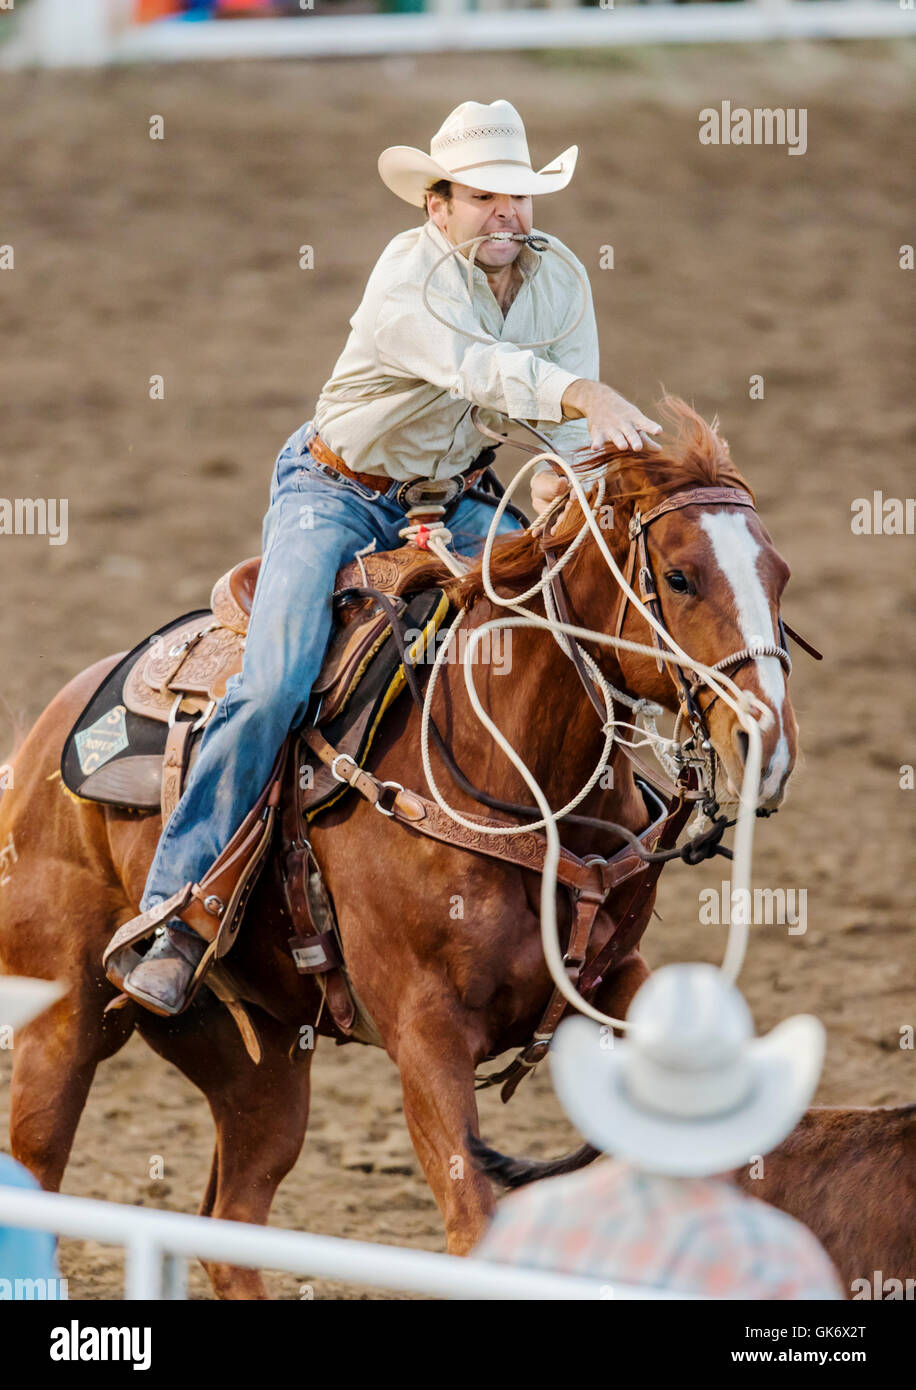 Rodeo cowboy on horseback competing in calf roping, or tie-down roping event, Chaffee County Fair & Rodeo, Salida, Colorado, USA Stock Photo